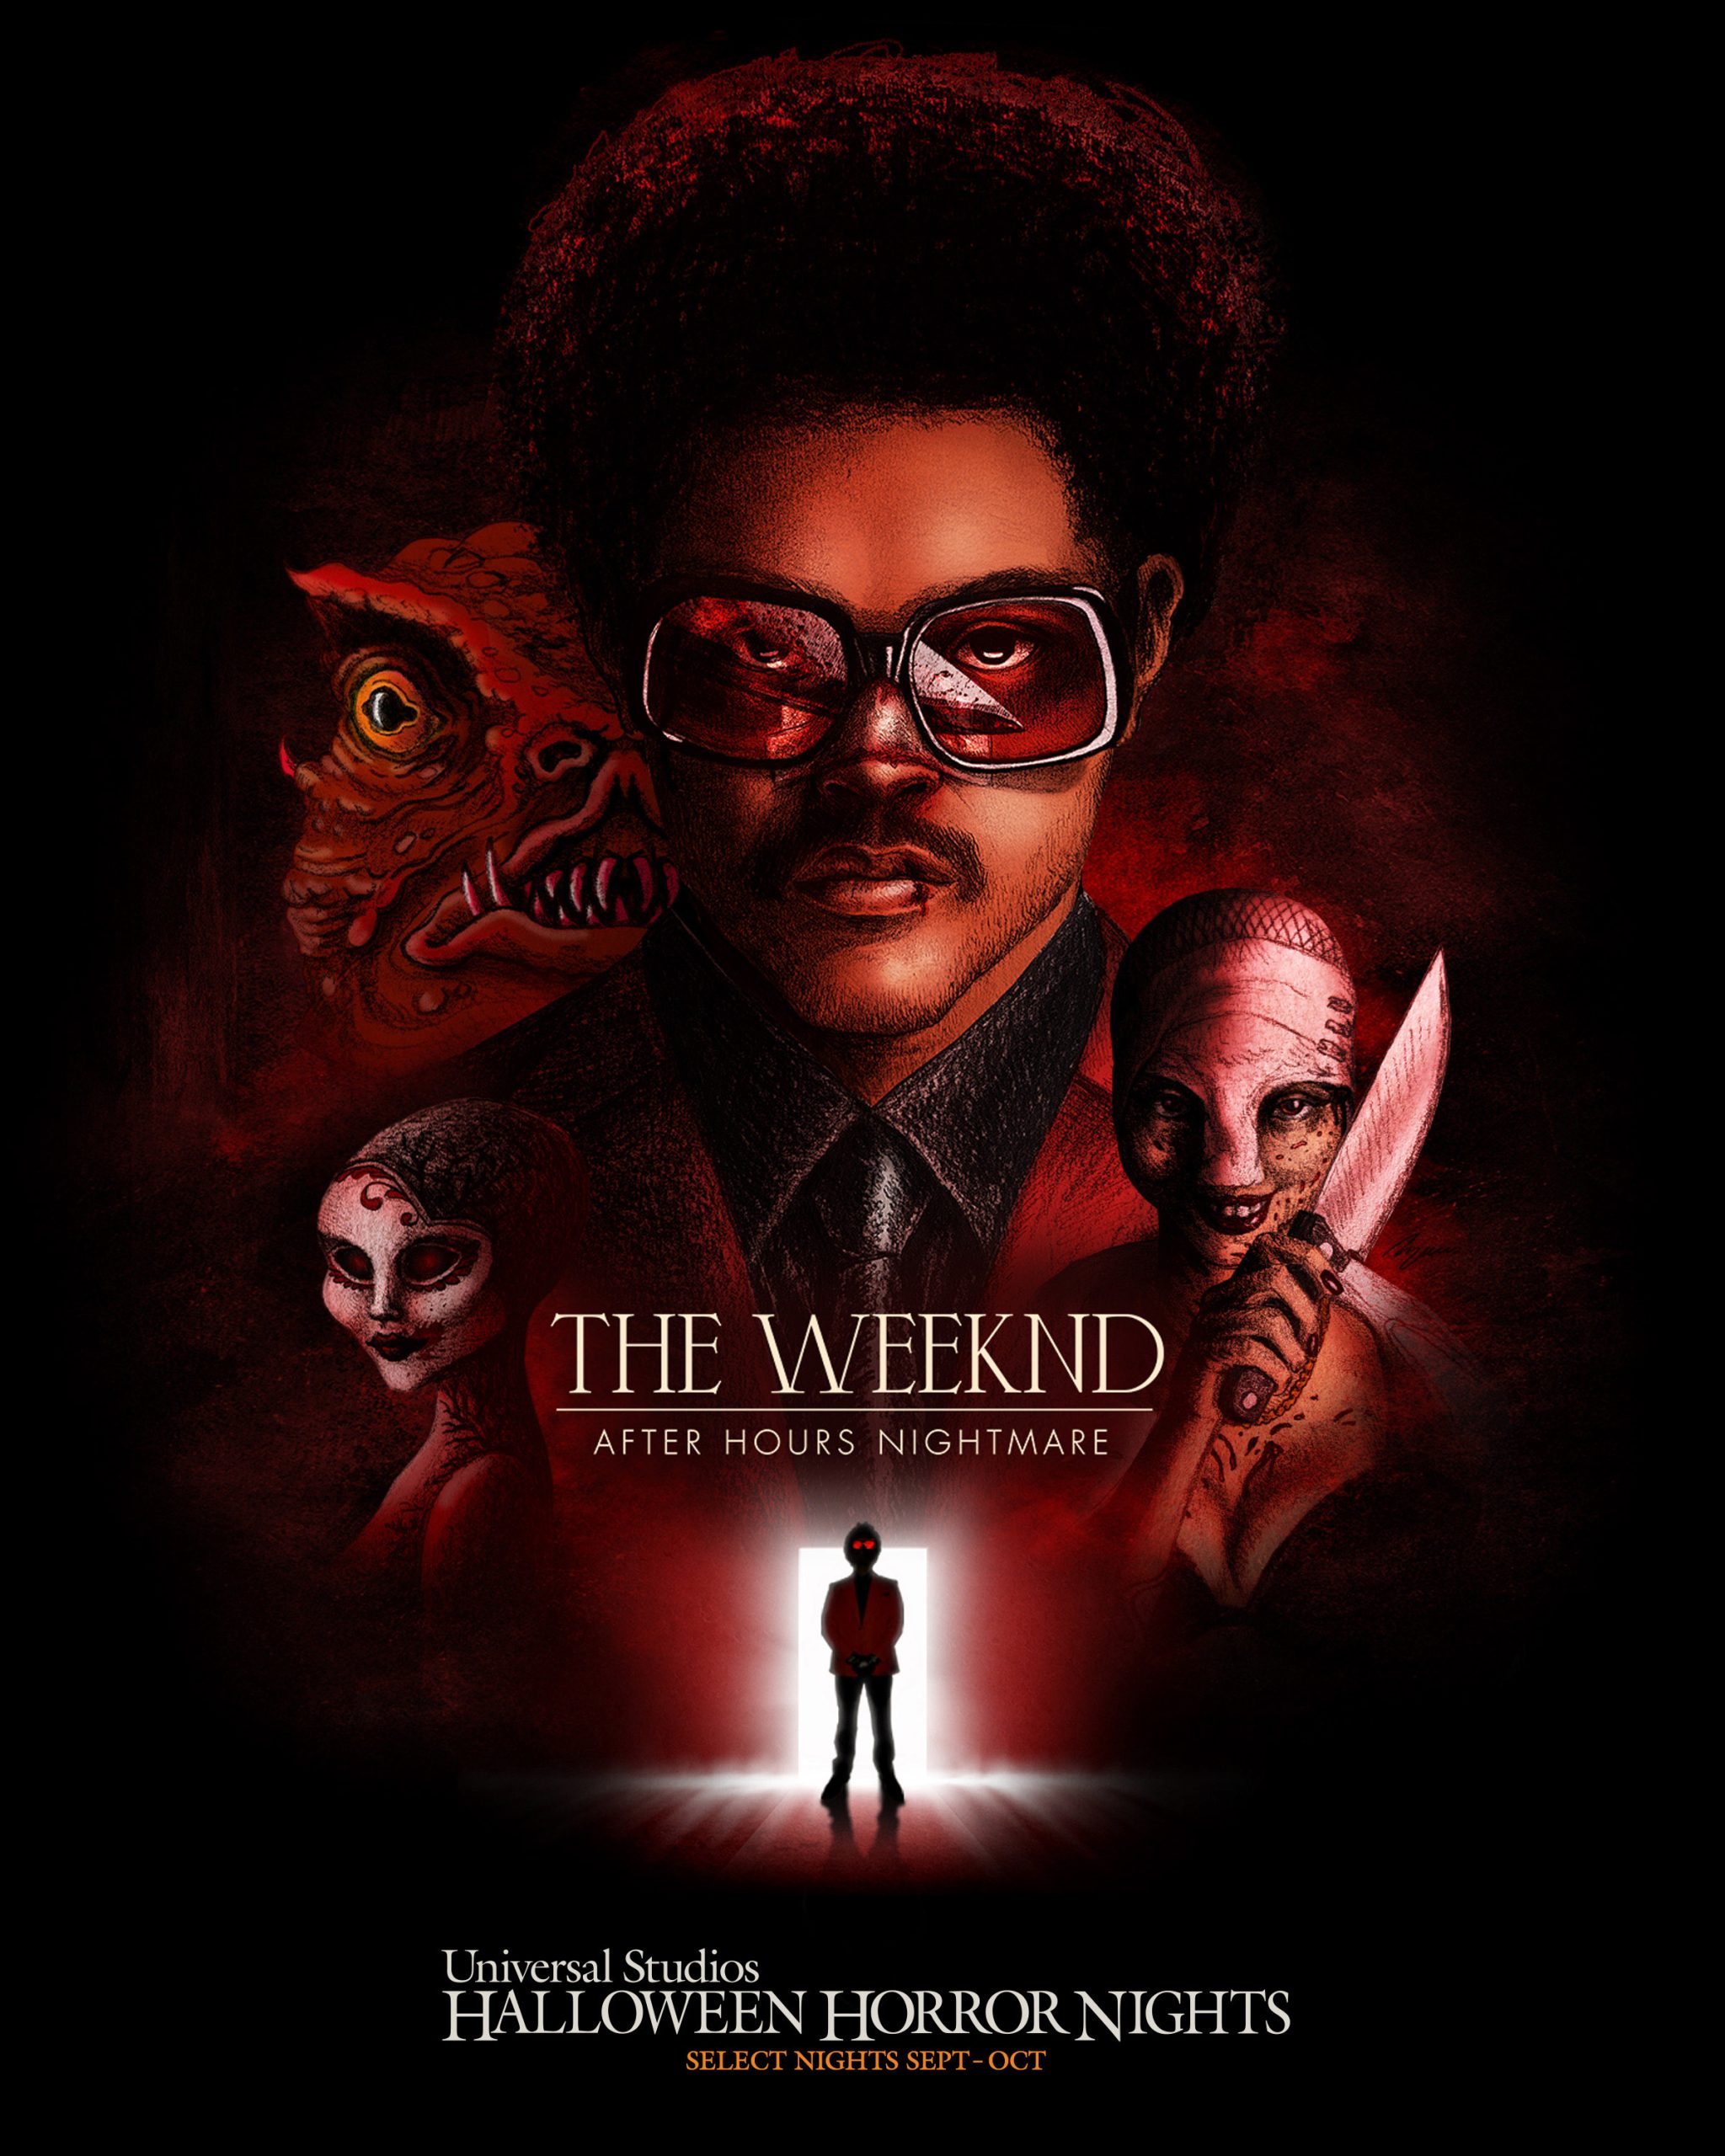 The Weeknd Haunted House Announced for Halloween Horror Nights 31 and Multi-Night Tickets Now Available